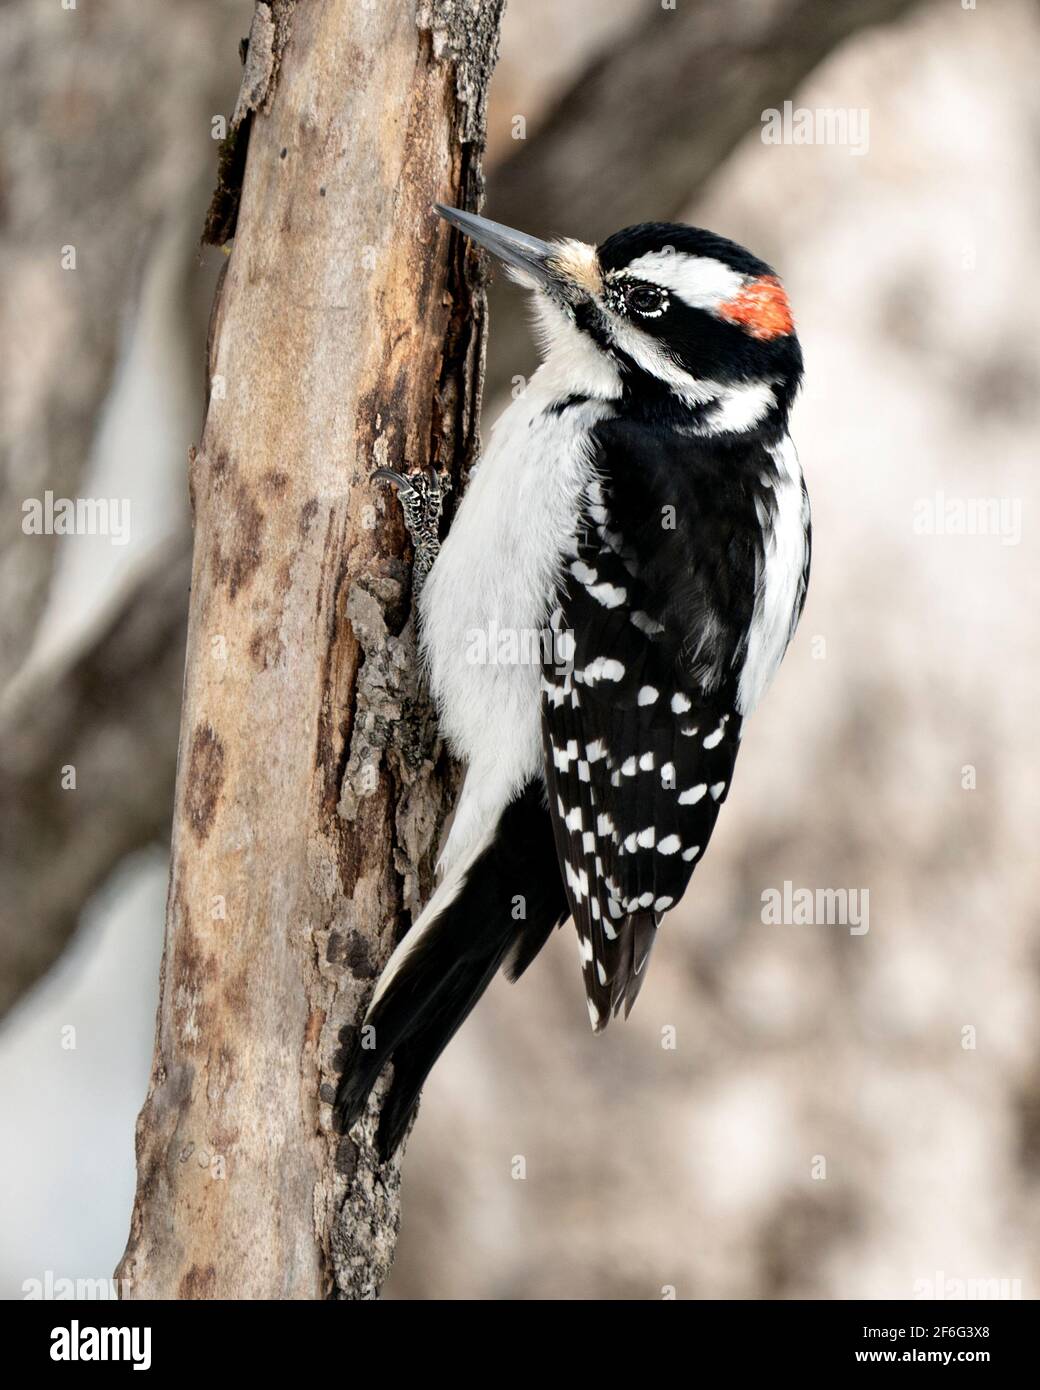 Woodpecker close-up profile view climbing tree trunk and drumming in its environment and habitat in the forest with a blur background. Image. Picture. Stock Photo